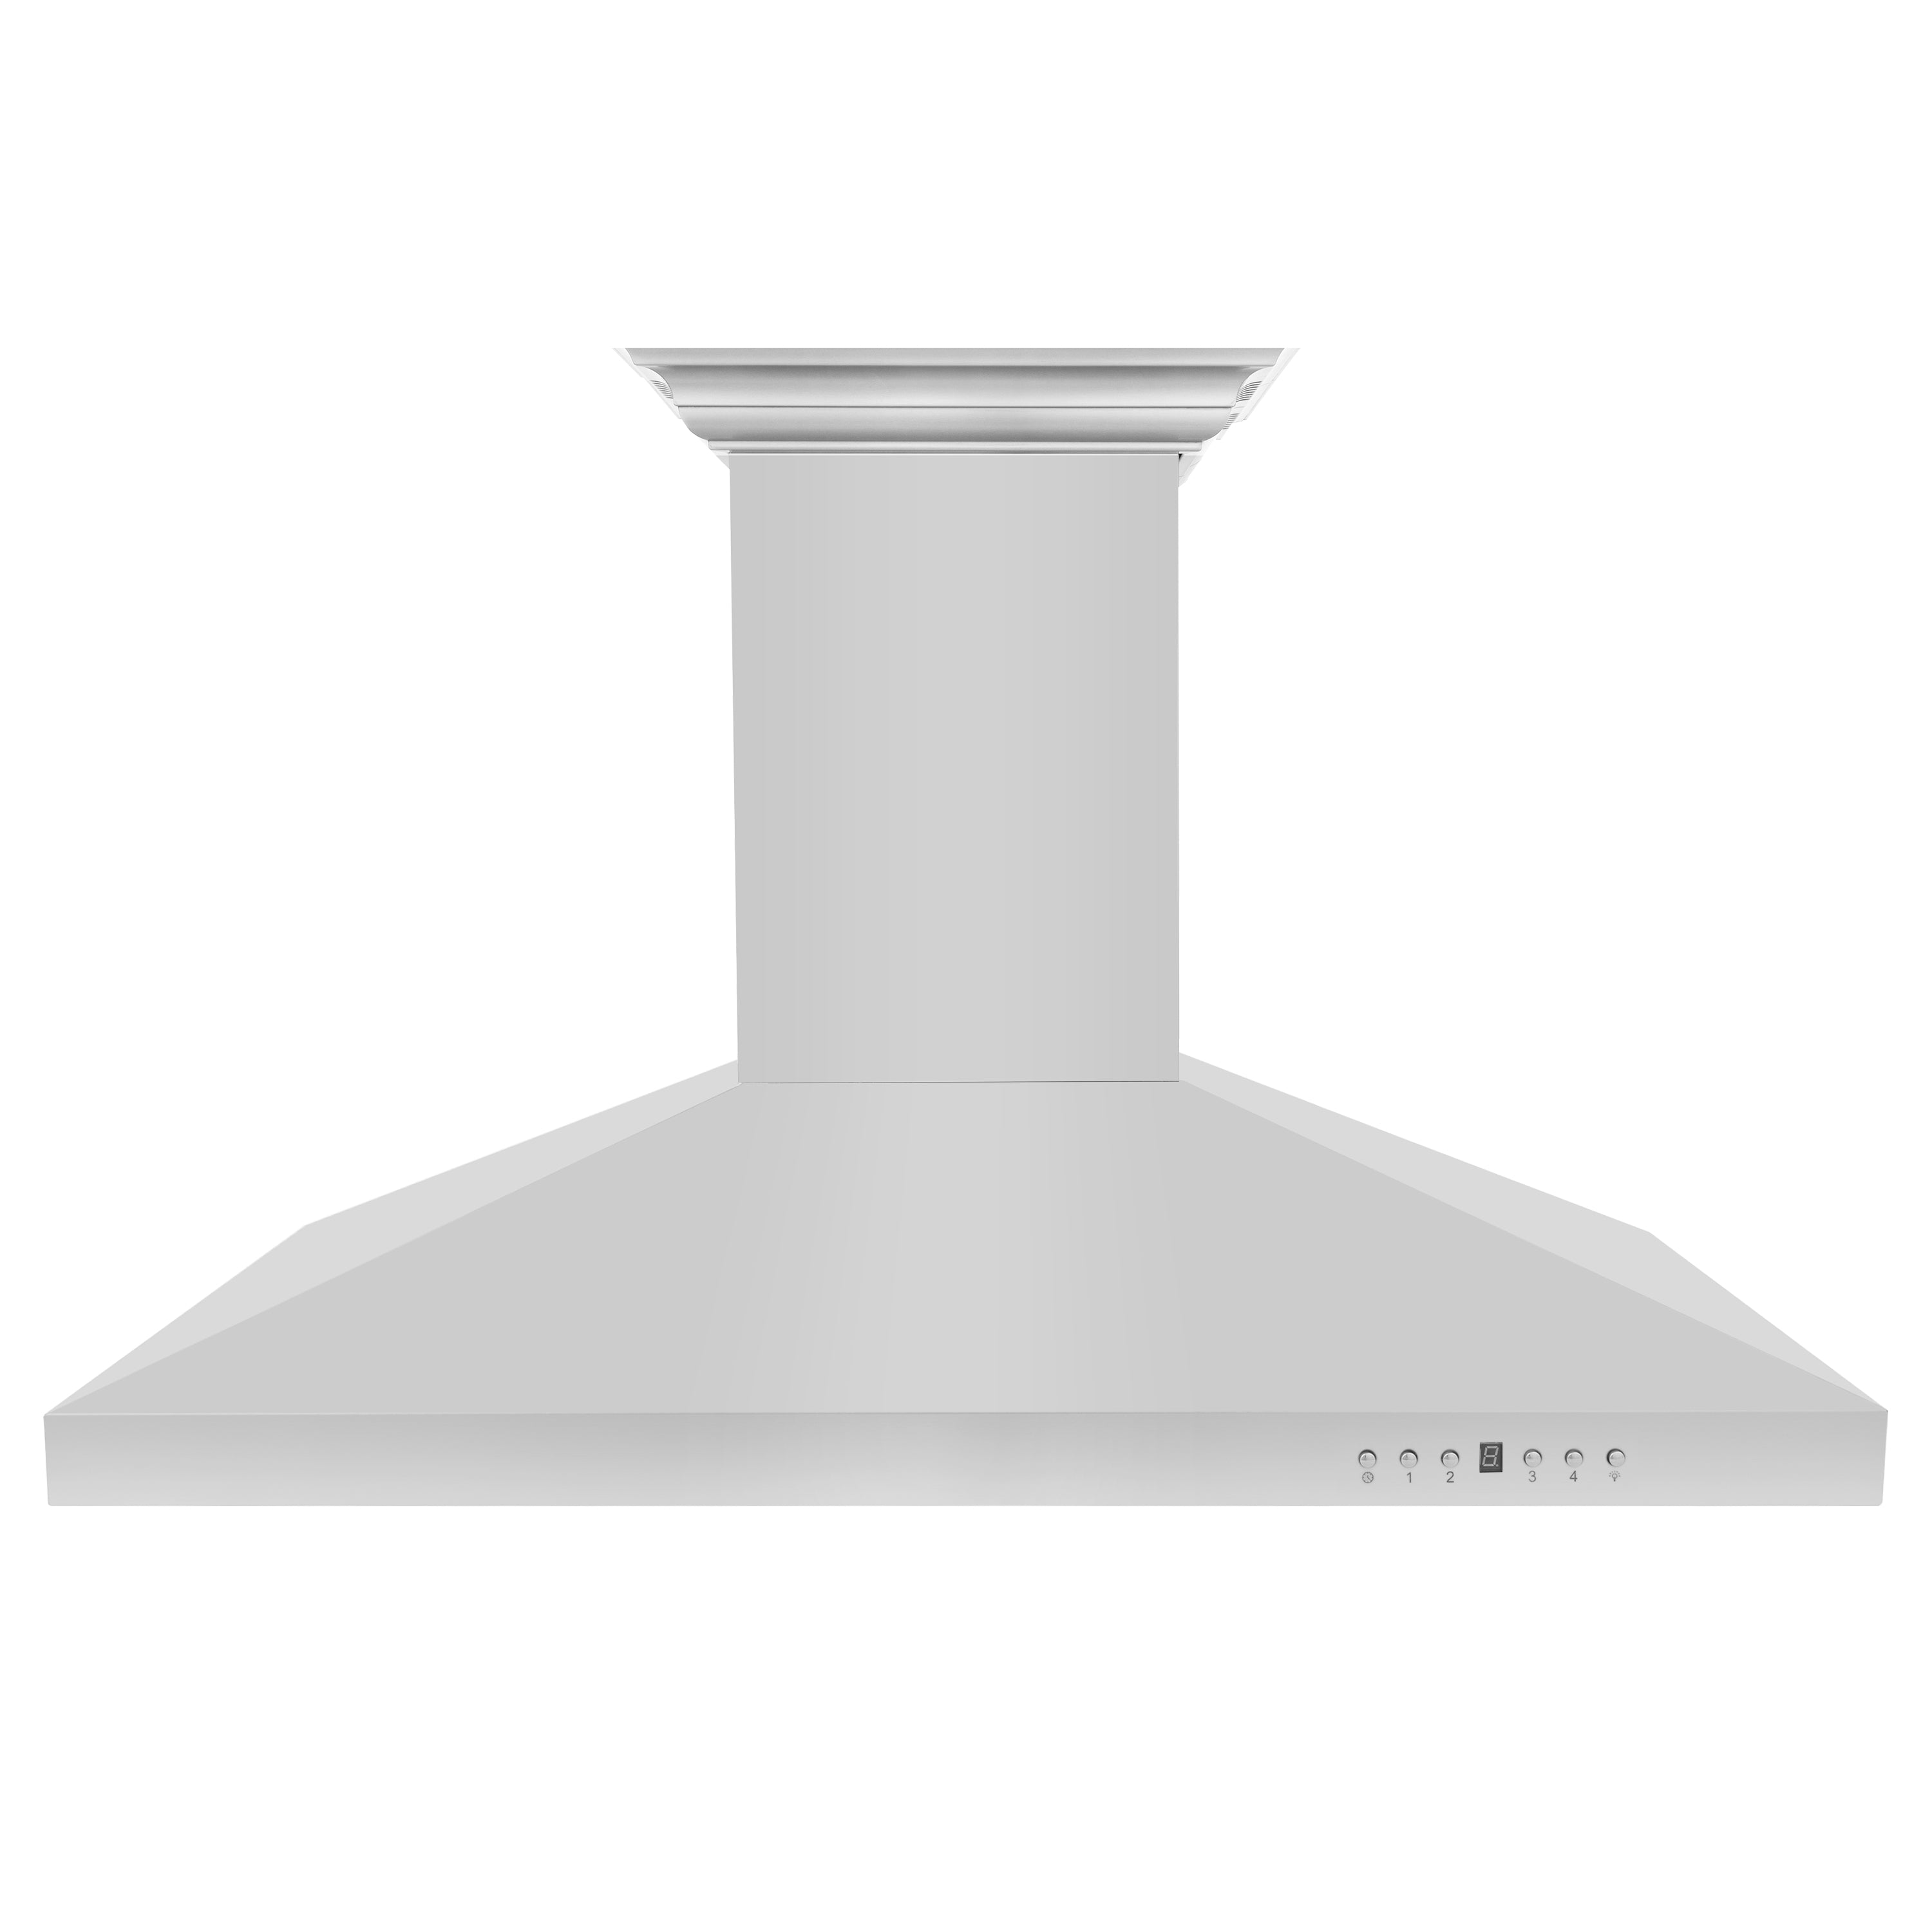 48" ZLINE CrownSound‚ Ducted Vent Island Mount Range Hood in Stainless Steel with Built-in Bluetooth Speakers (KL3iCRN-BT-48)